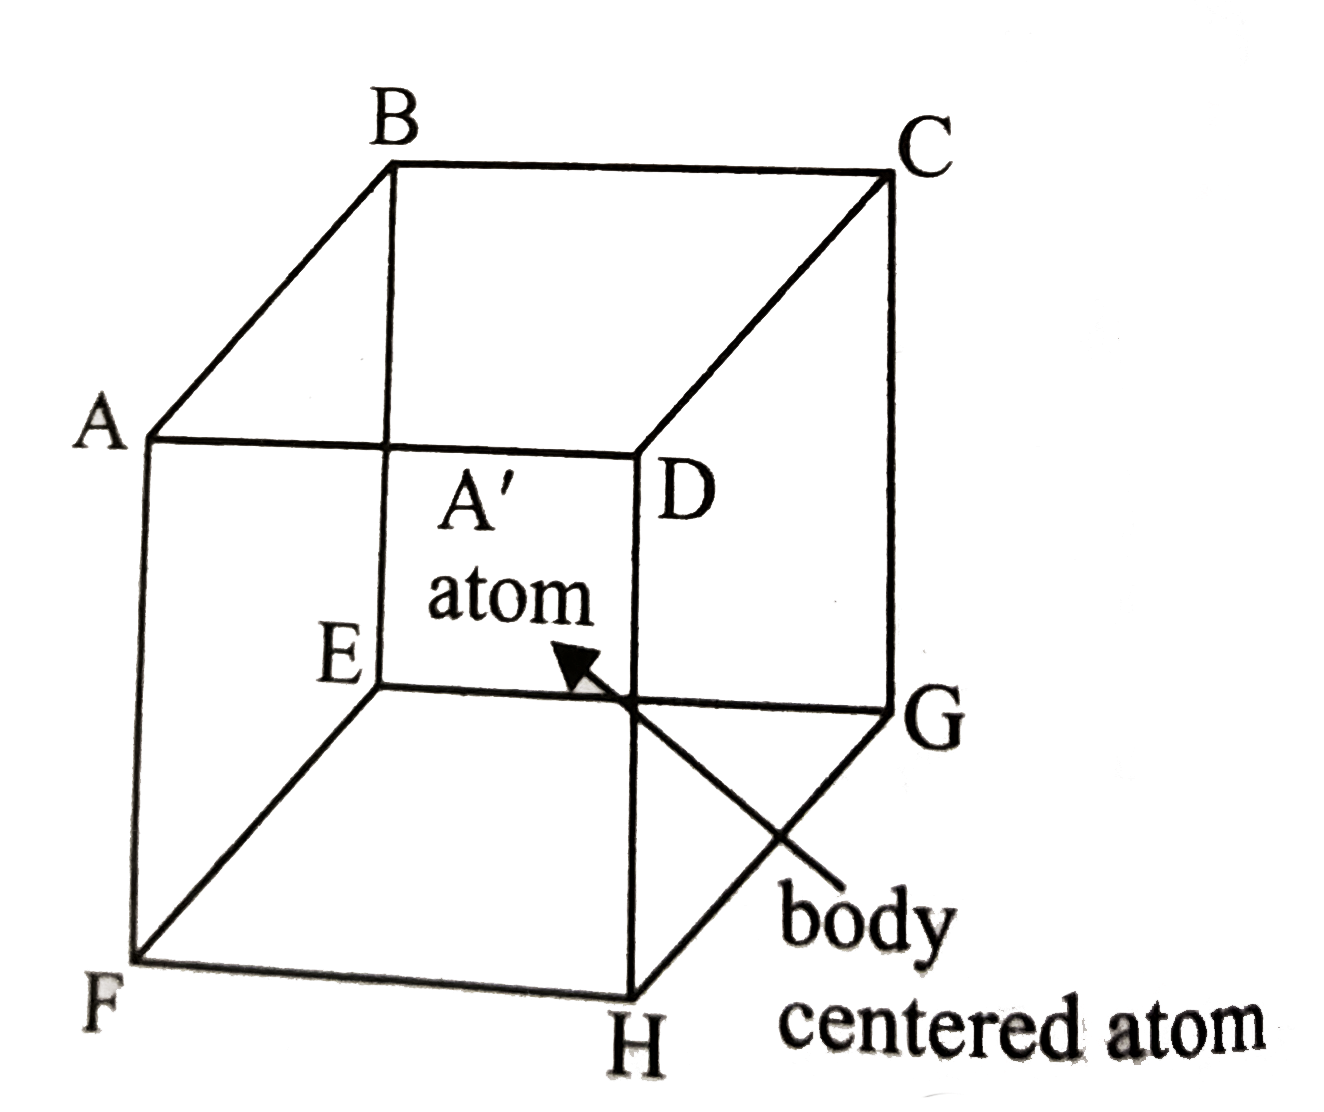 In body-centred cubic lattice given below, the three disntances AB, AC, and AA' are